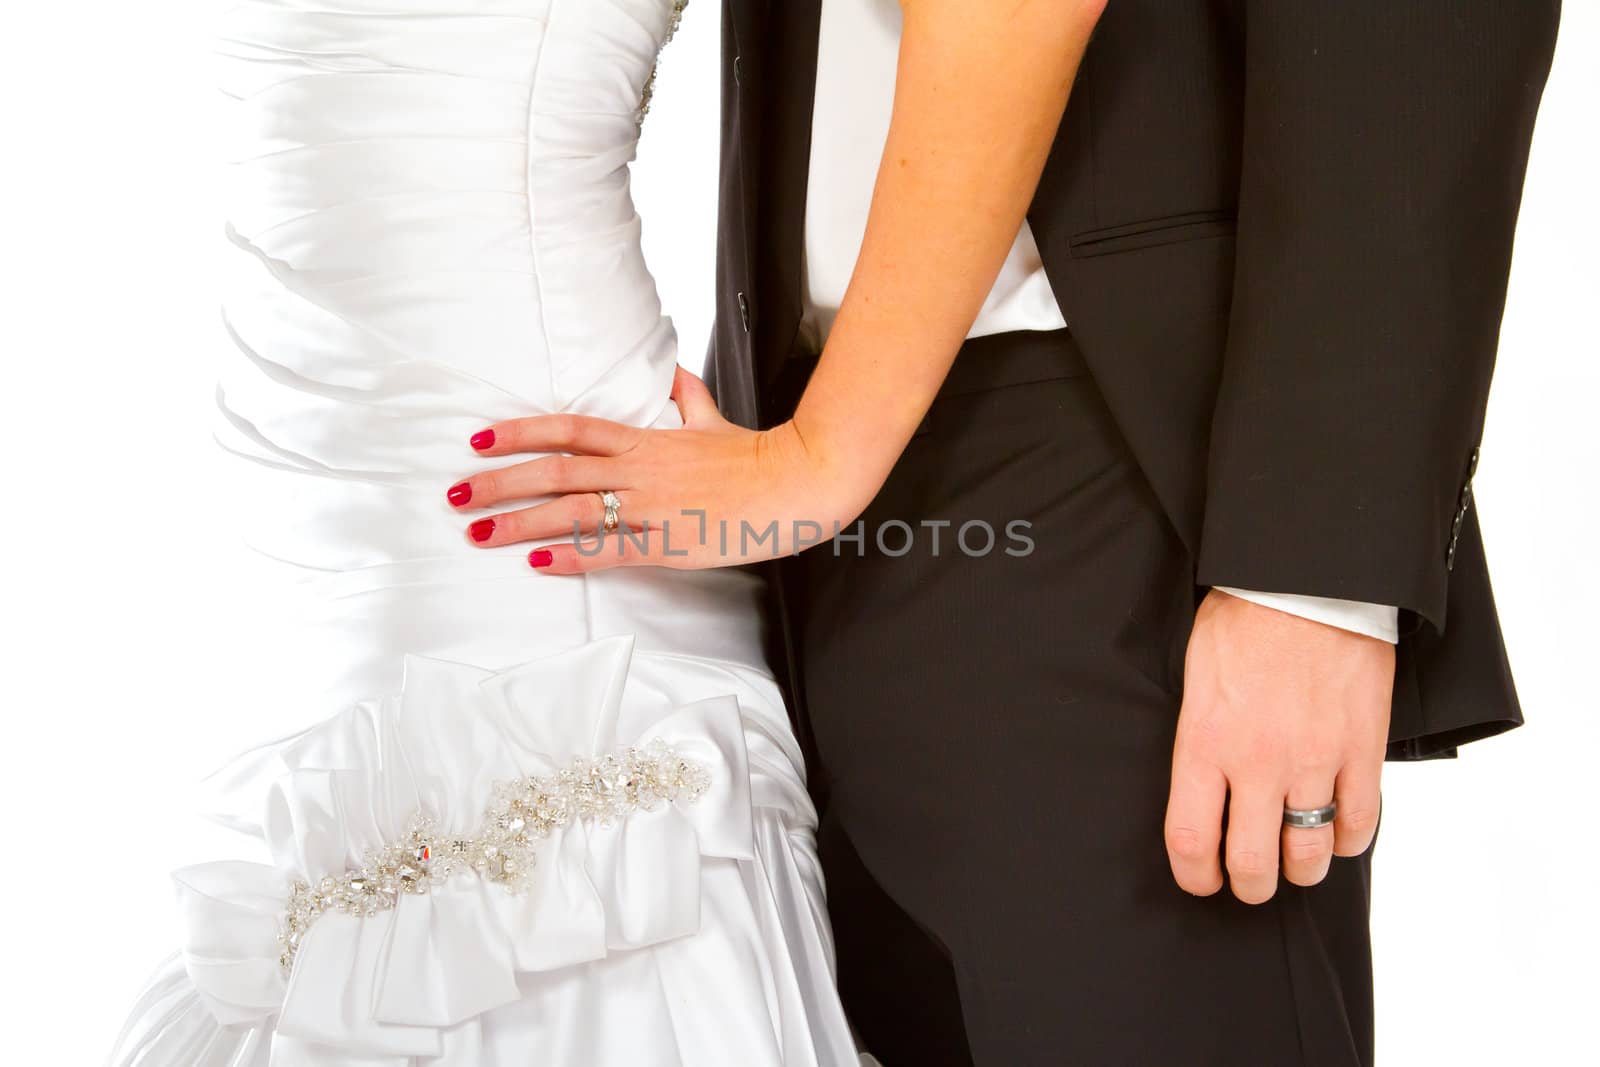 A bride and groom portrait showing only their bodies and their hands against a white background. You can see the wedding rings on the fingers.